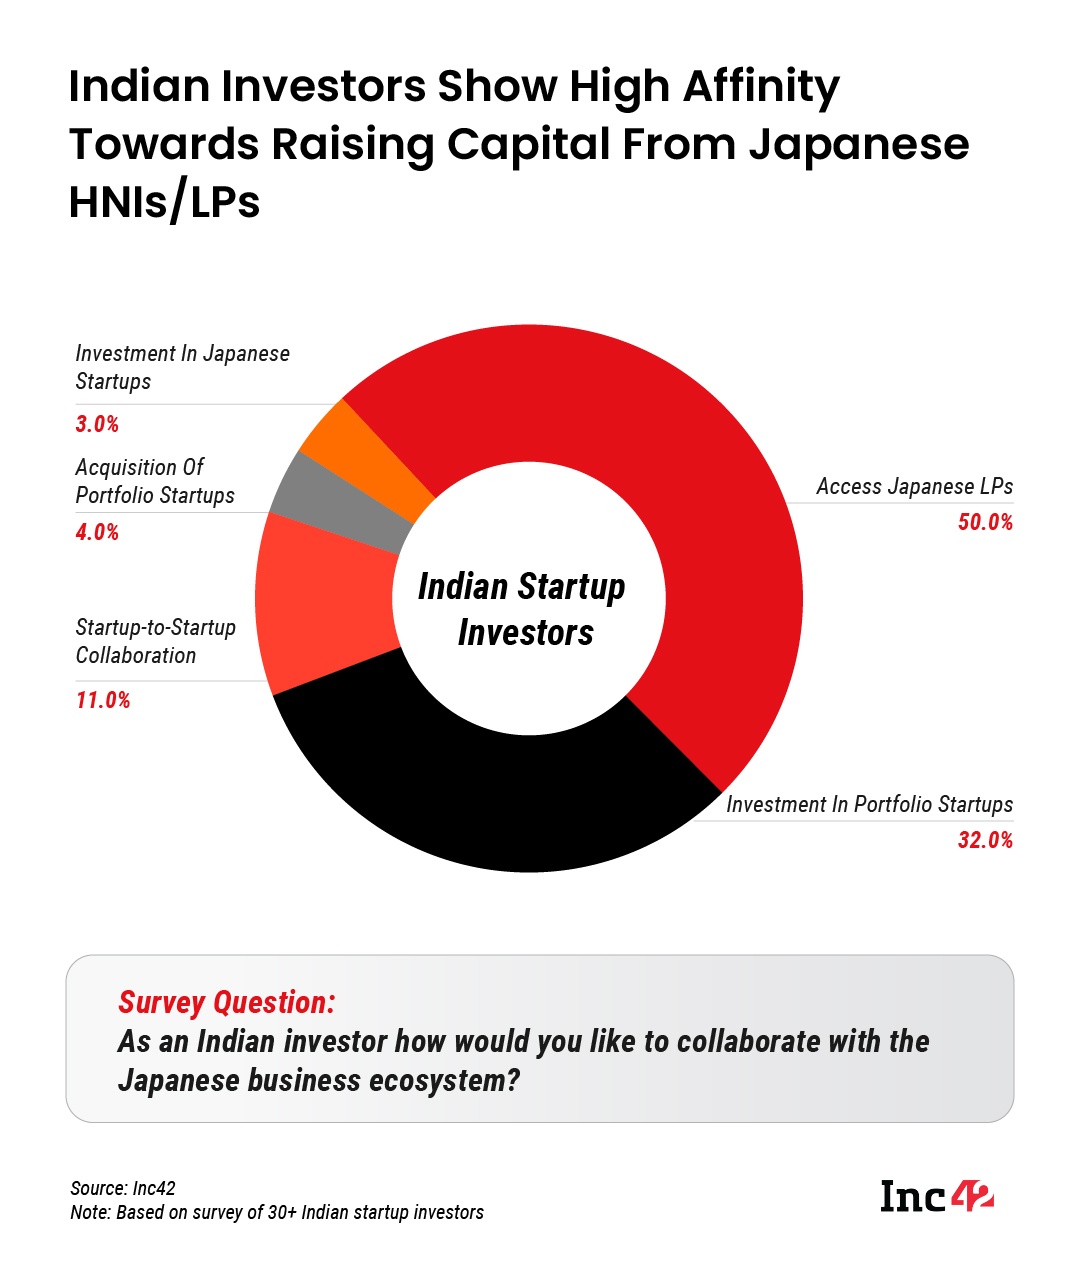 Indian Investors Show High Affinity Towards Raising Capital From Japanese HNIs/LPs